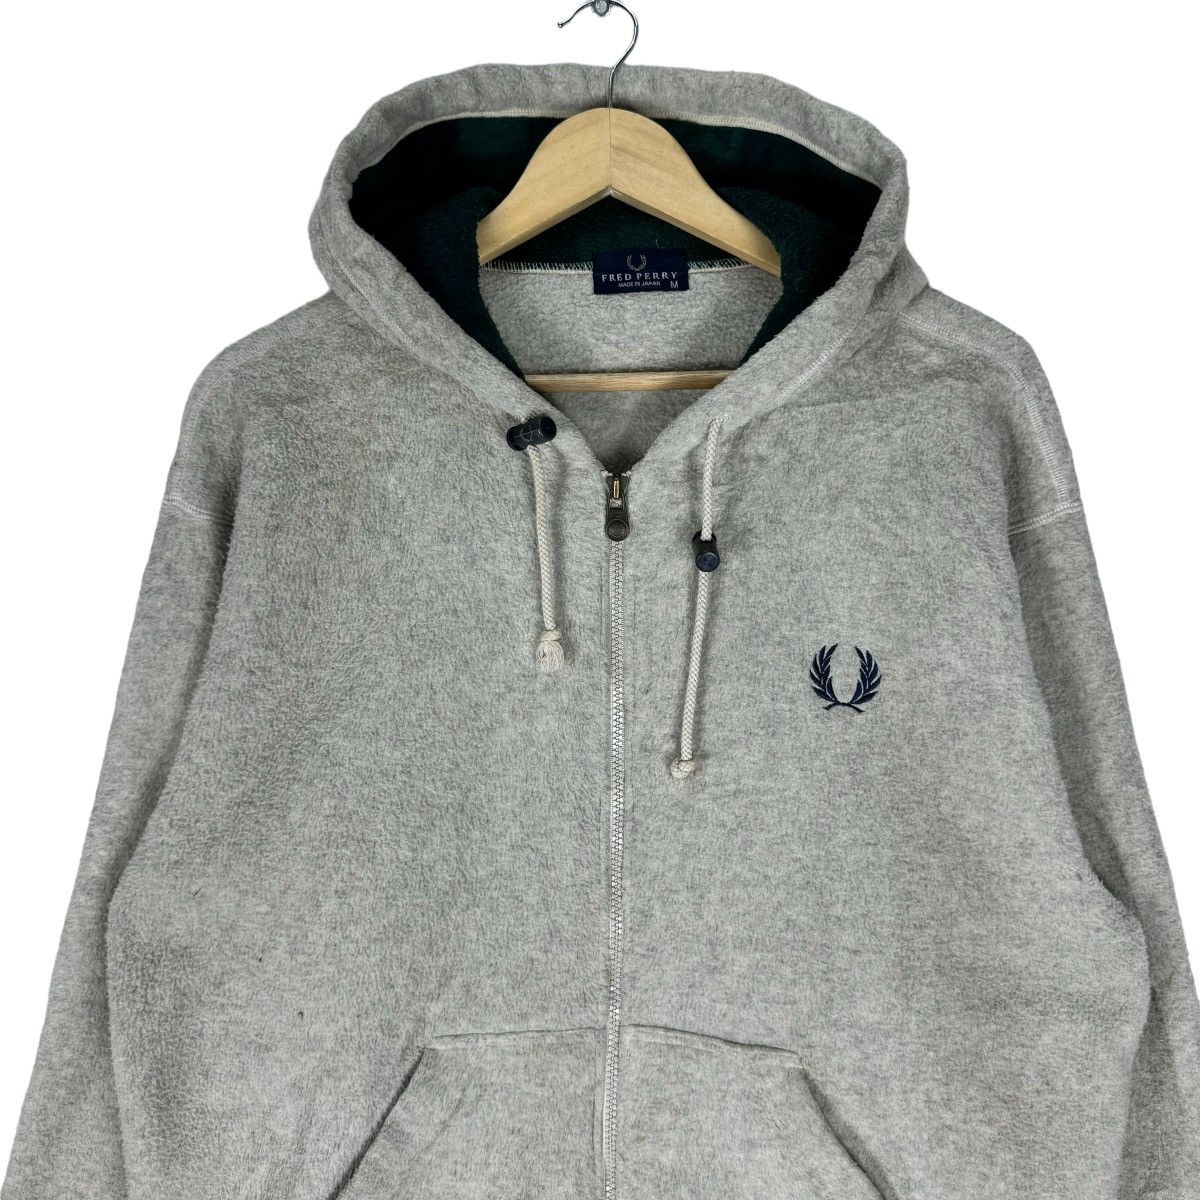 ❄️FRED PERRY HOODIE FLEECE SWEATER - 3